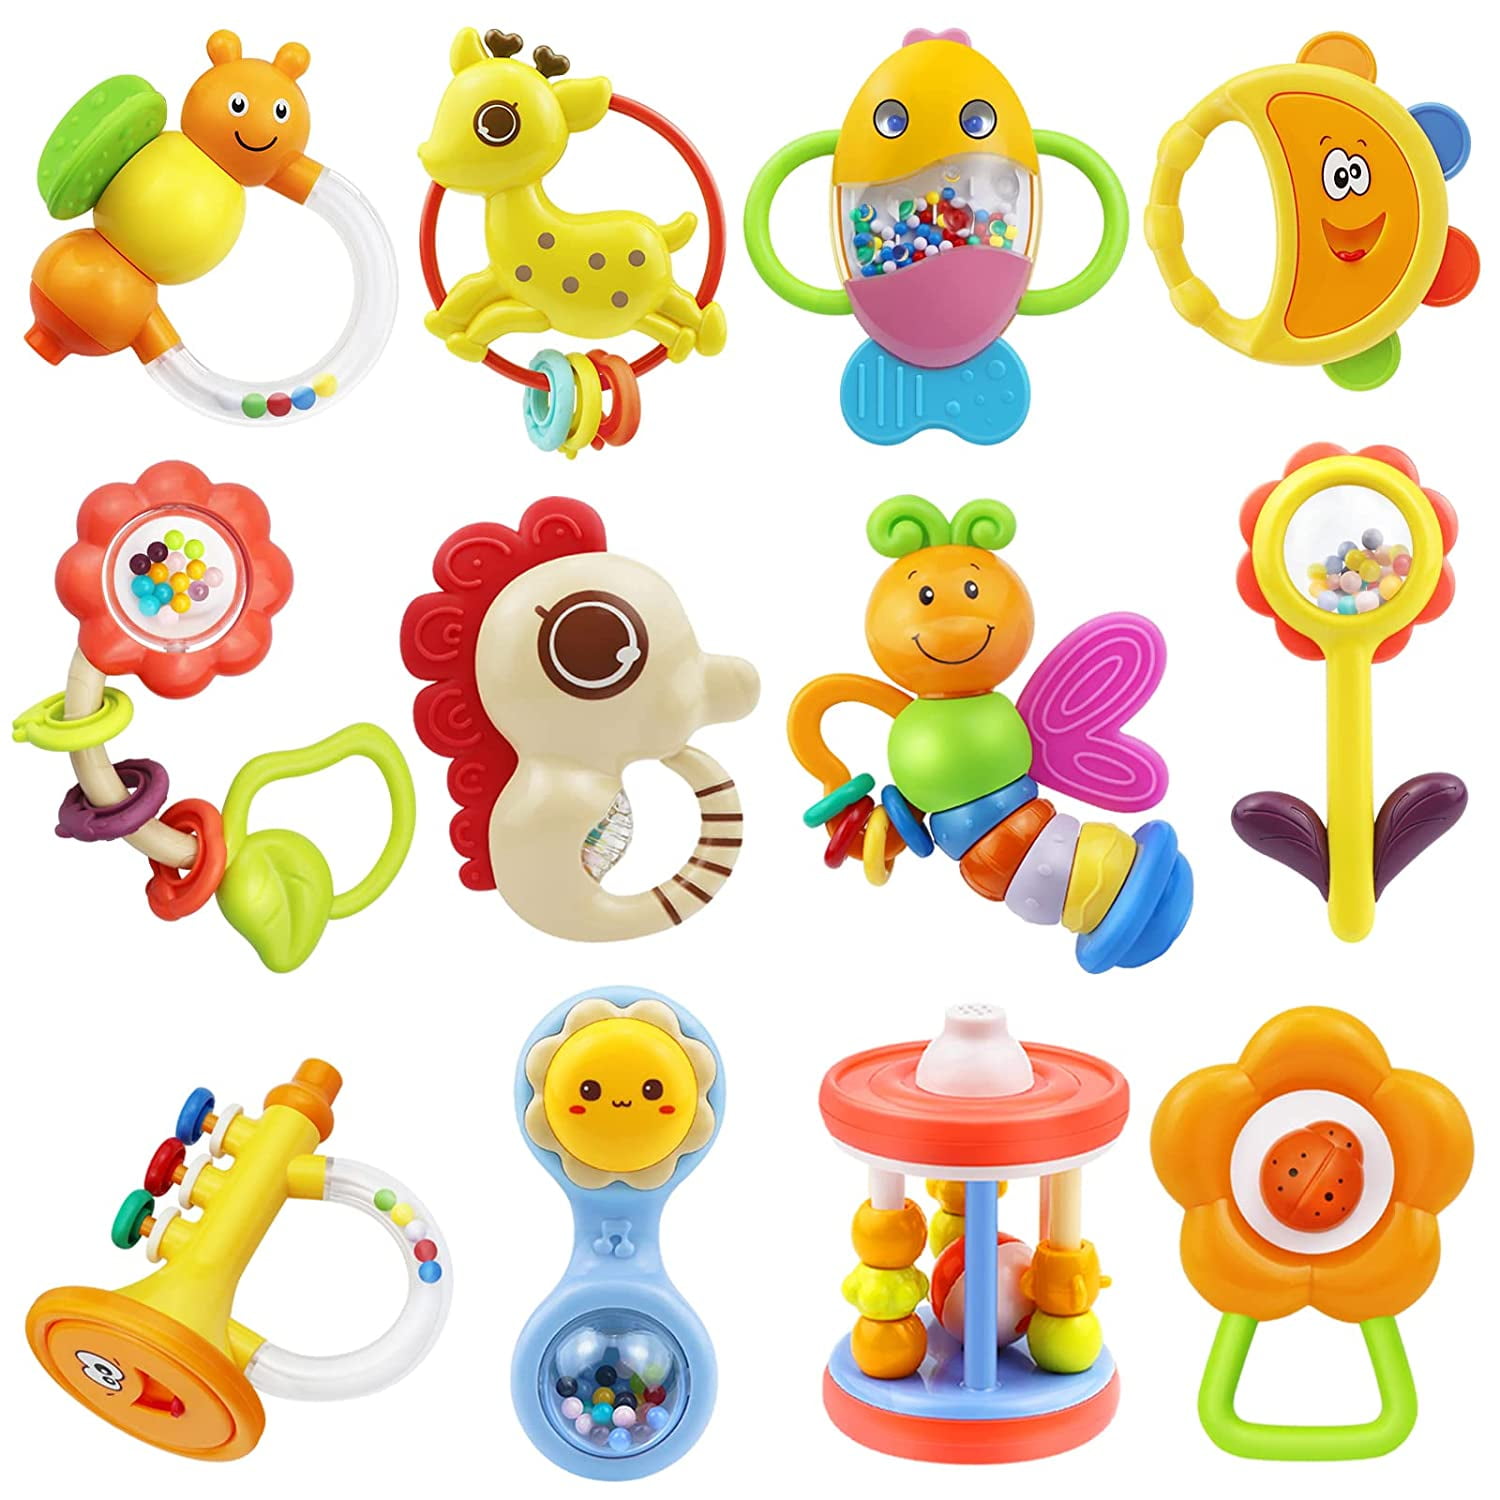 MOONTOY Baby Rattle Toys 3 6 Months Sensory Babies Teething Infants 0 12 Newborn Girl Infant Boy Gifts Set 5b9847cb 1204 4359 adcc bb5afdceb755.e257cd63a923bd376caa2bf5e0f0d2ea